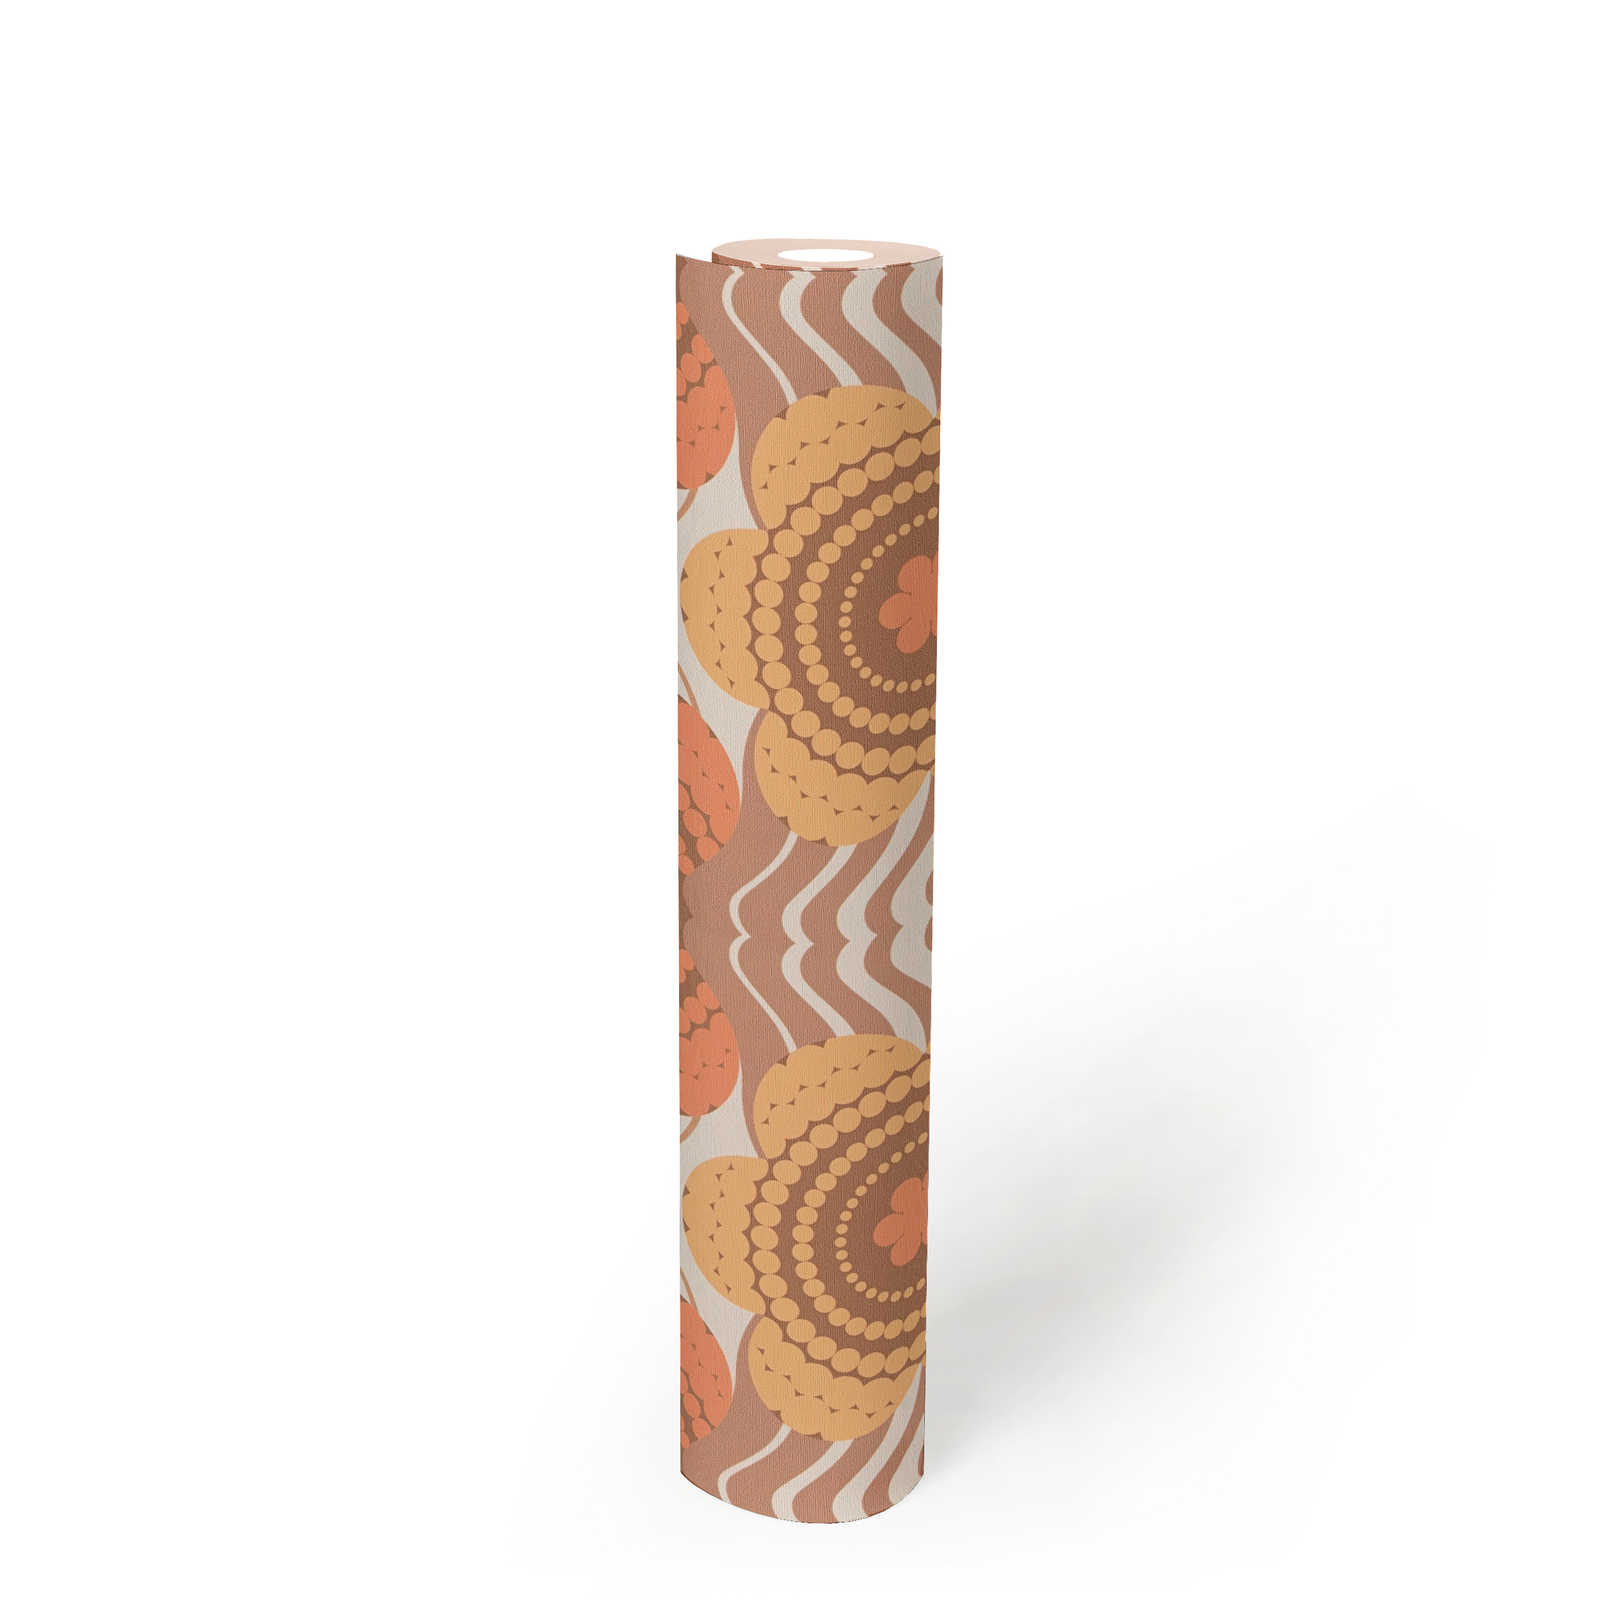             Floral pattern in dots design in the style of the 70s - brown, orange, yellow
        